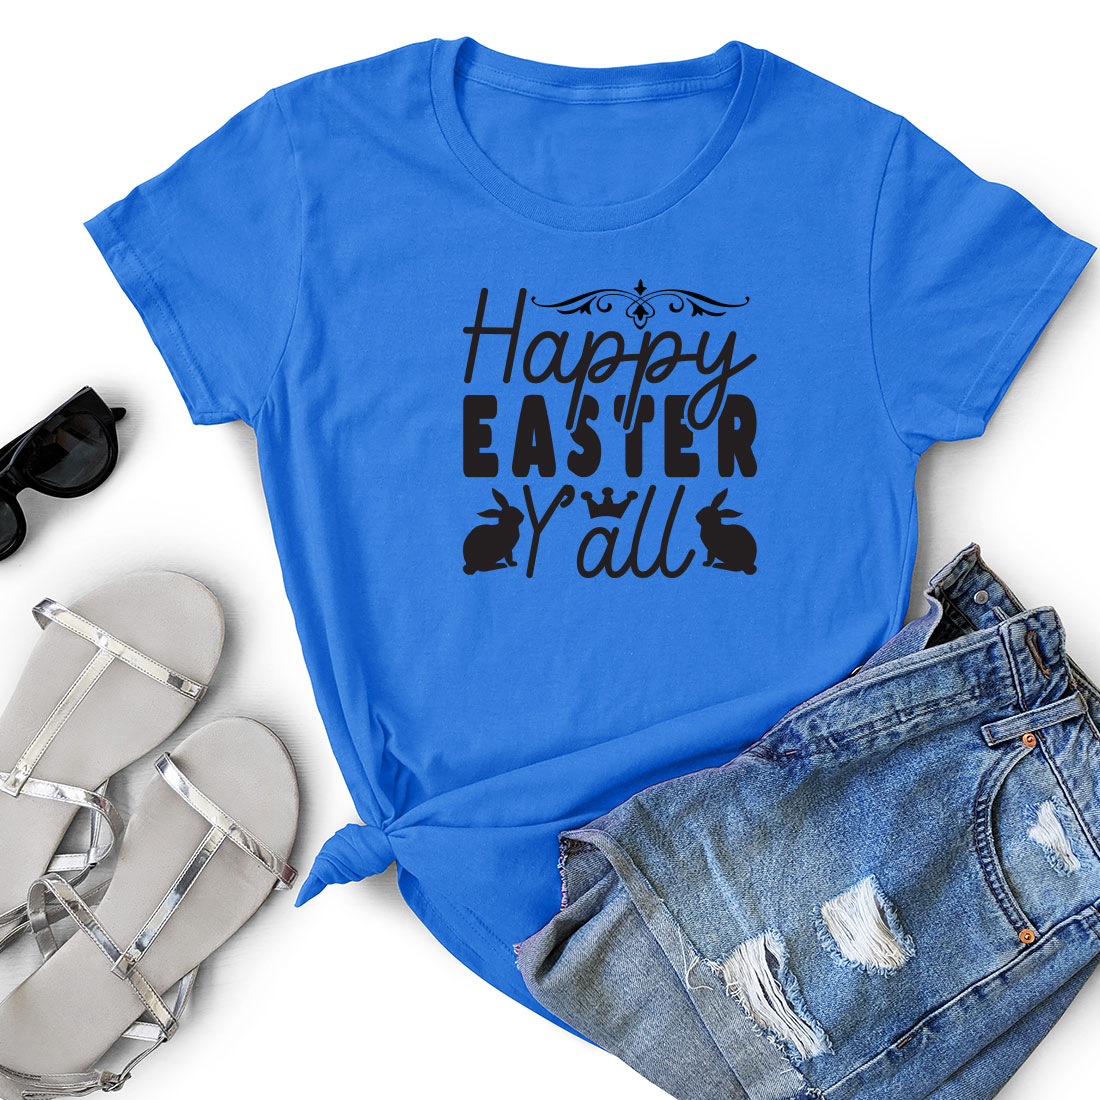 T - shirt that says happy easter y'all.